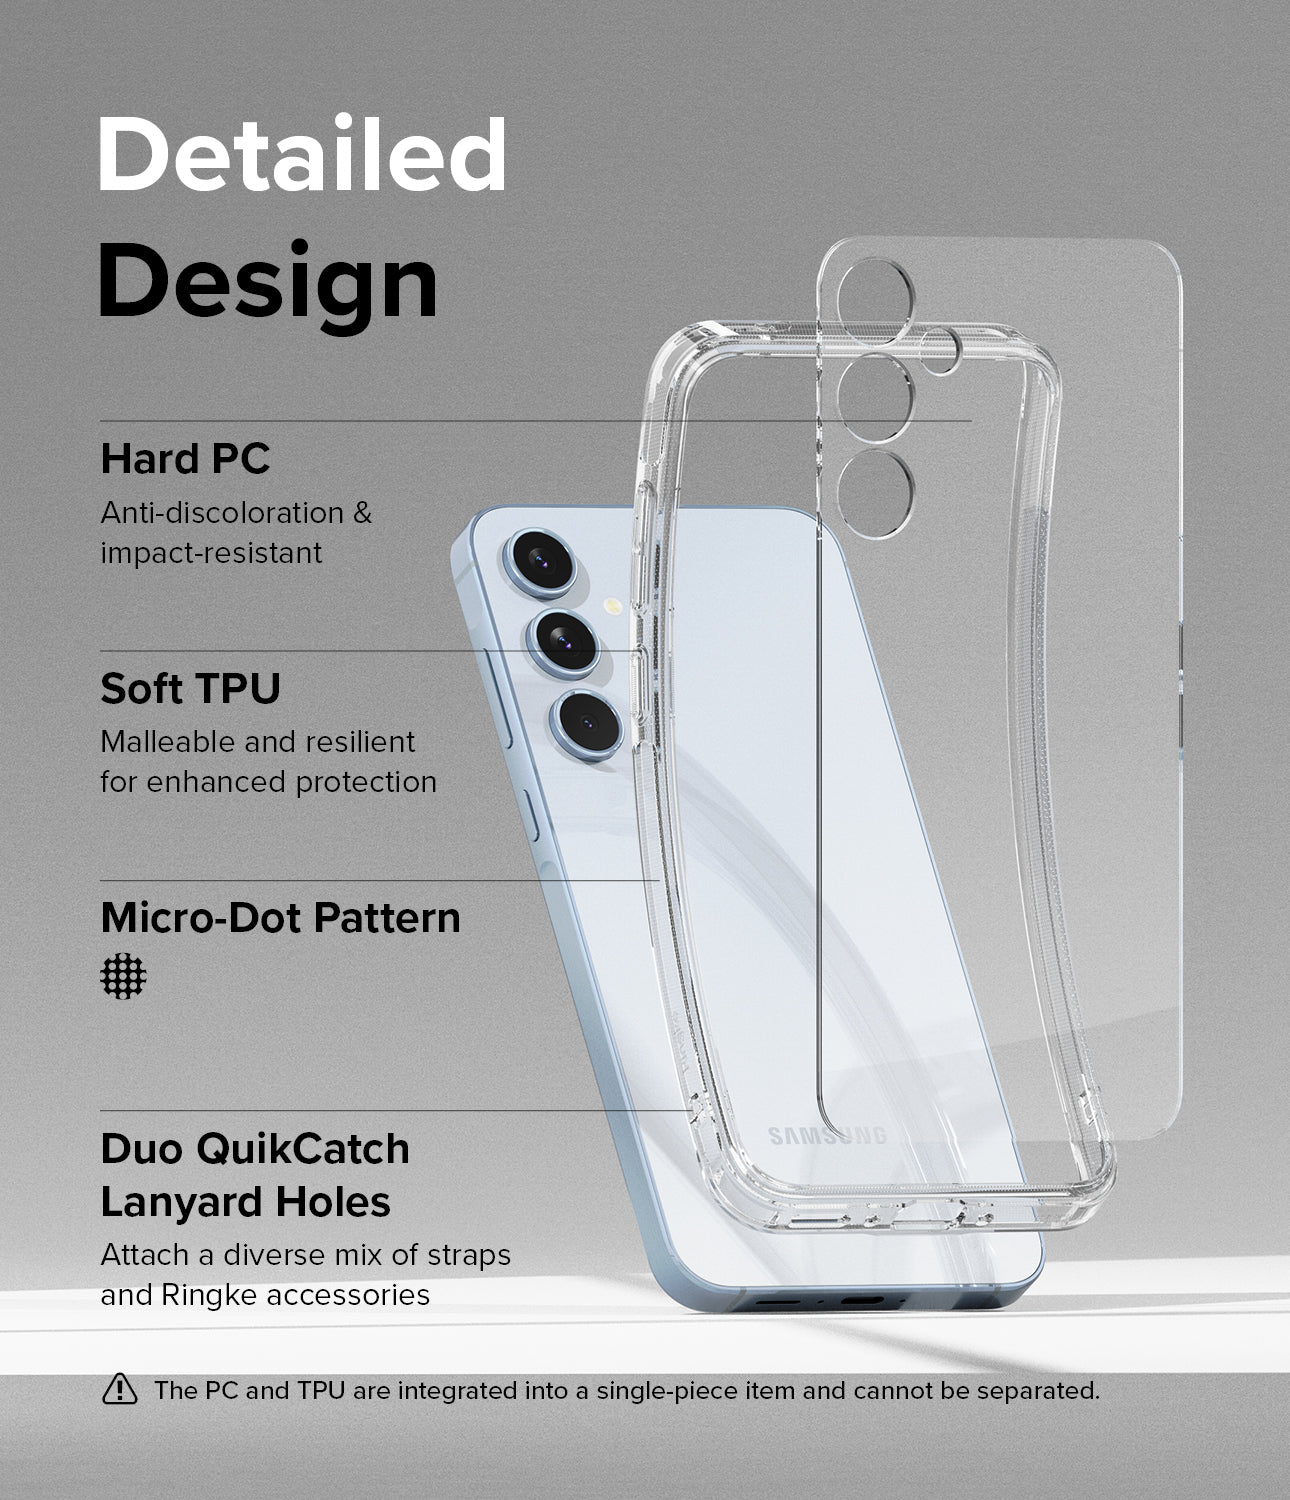 Galaxy A35 Case | Fusion - Detailed Design. Anti-discoloration and impact-resistant with Hard PC. Malleable and resilient for enhanced protection with Soft TPU. Micro-Dot Pattern. Duo QuikCatch Lanyard Holes to attach a diverse mix of straps and Ringke accessories.